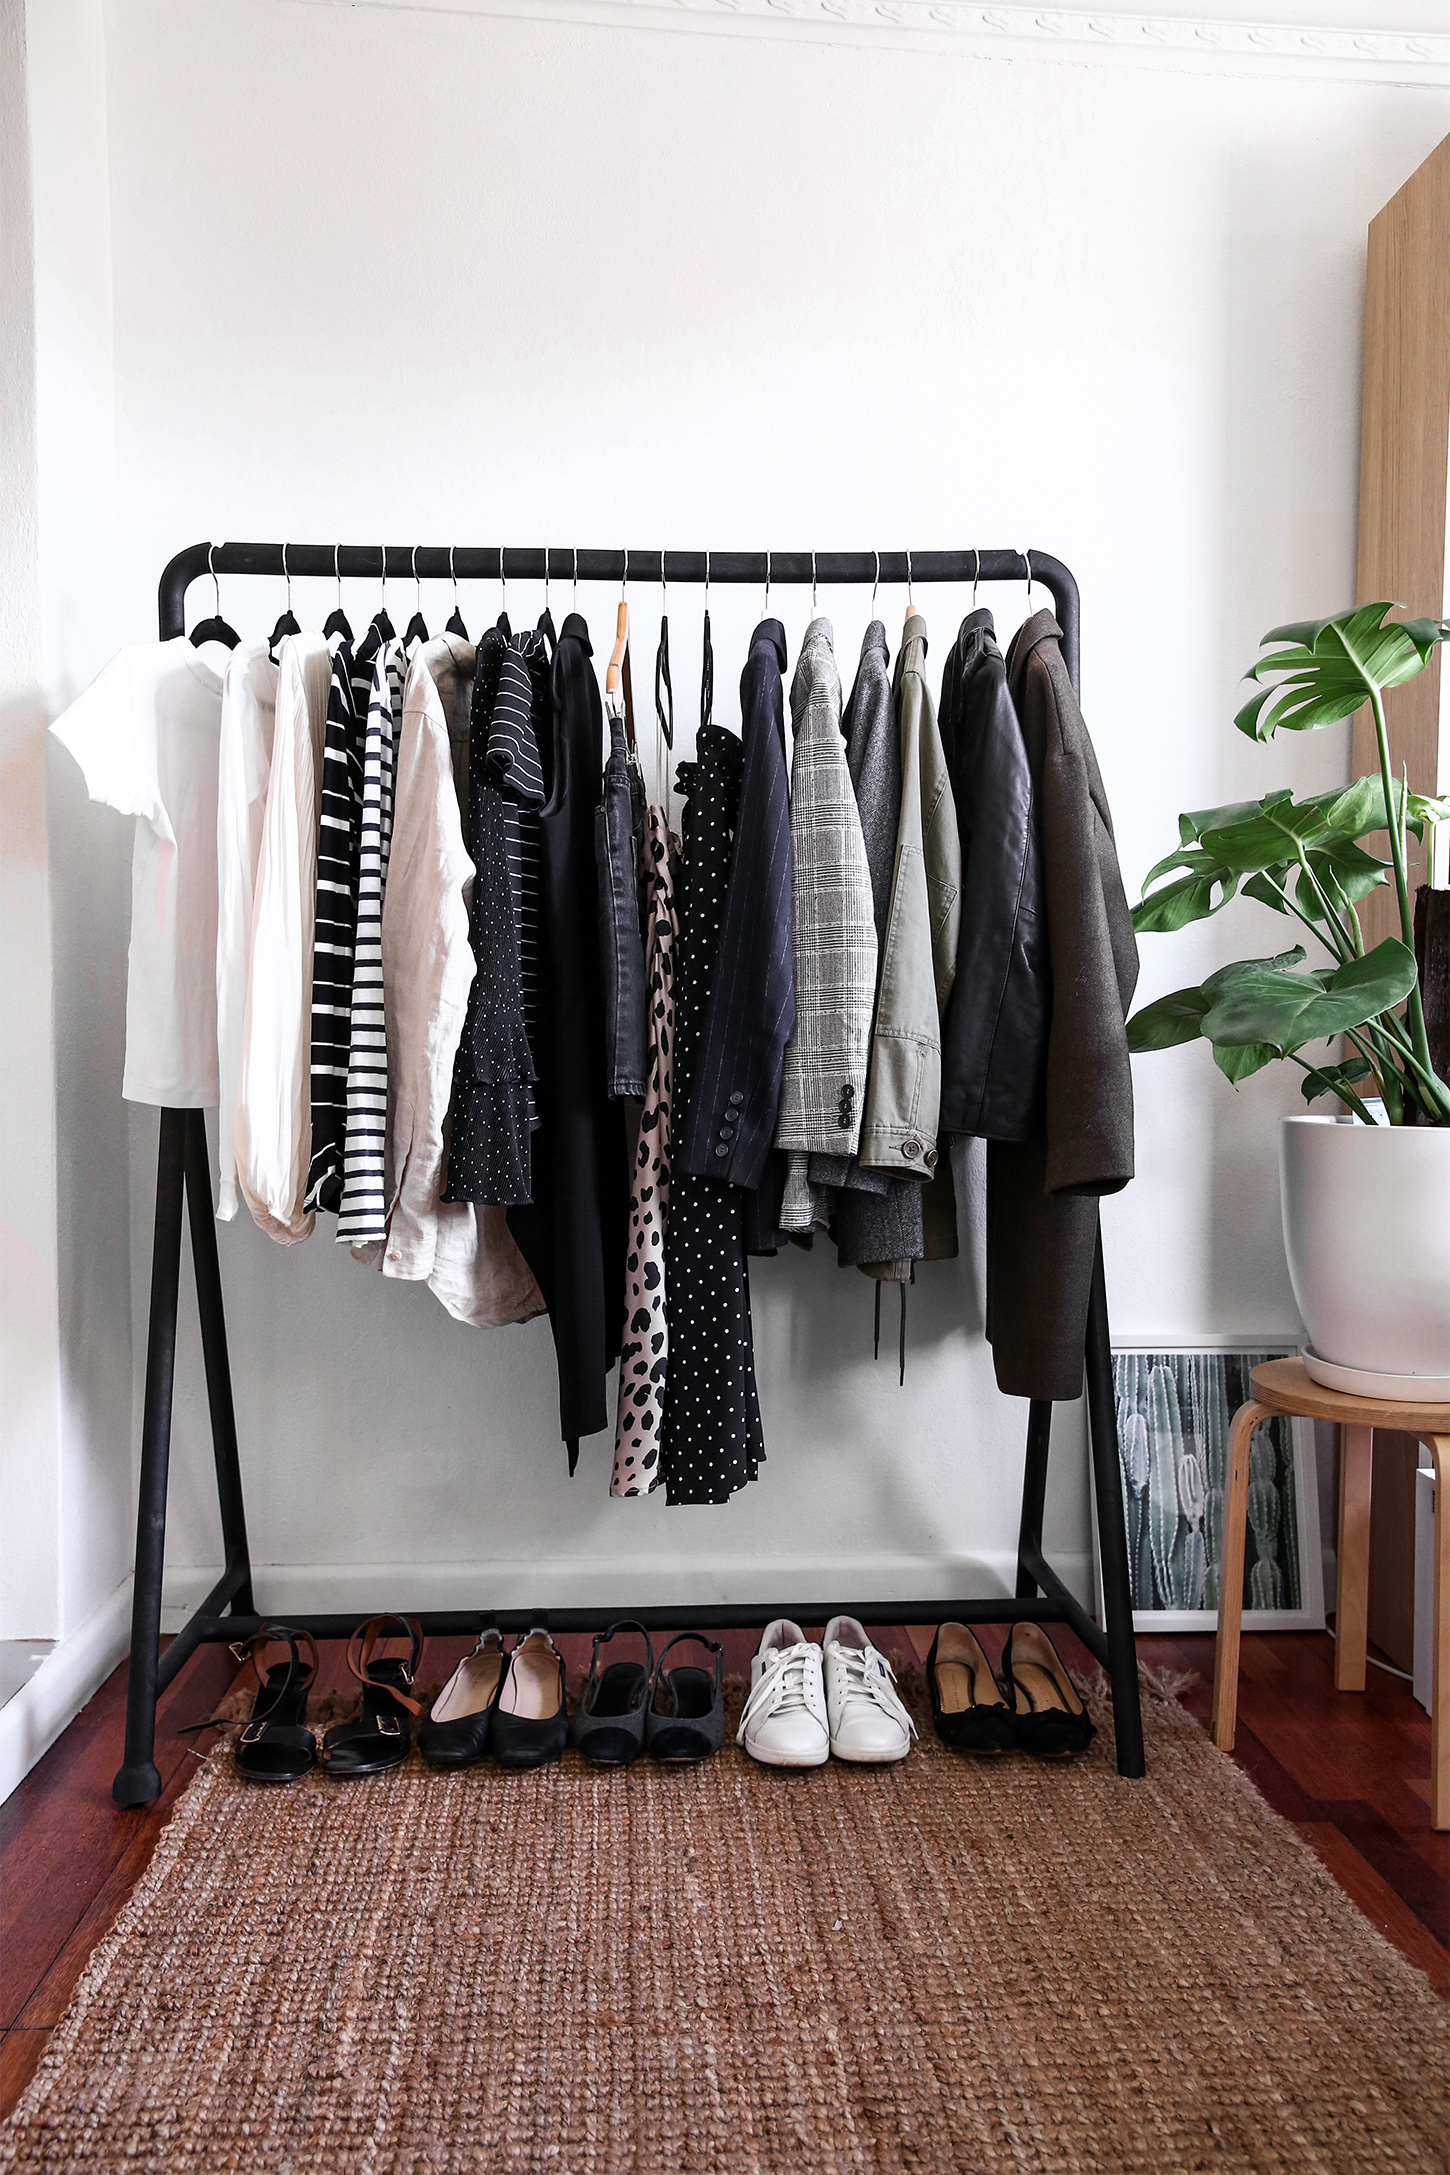 How to Responsibly Declutter your Wardrobe